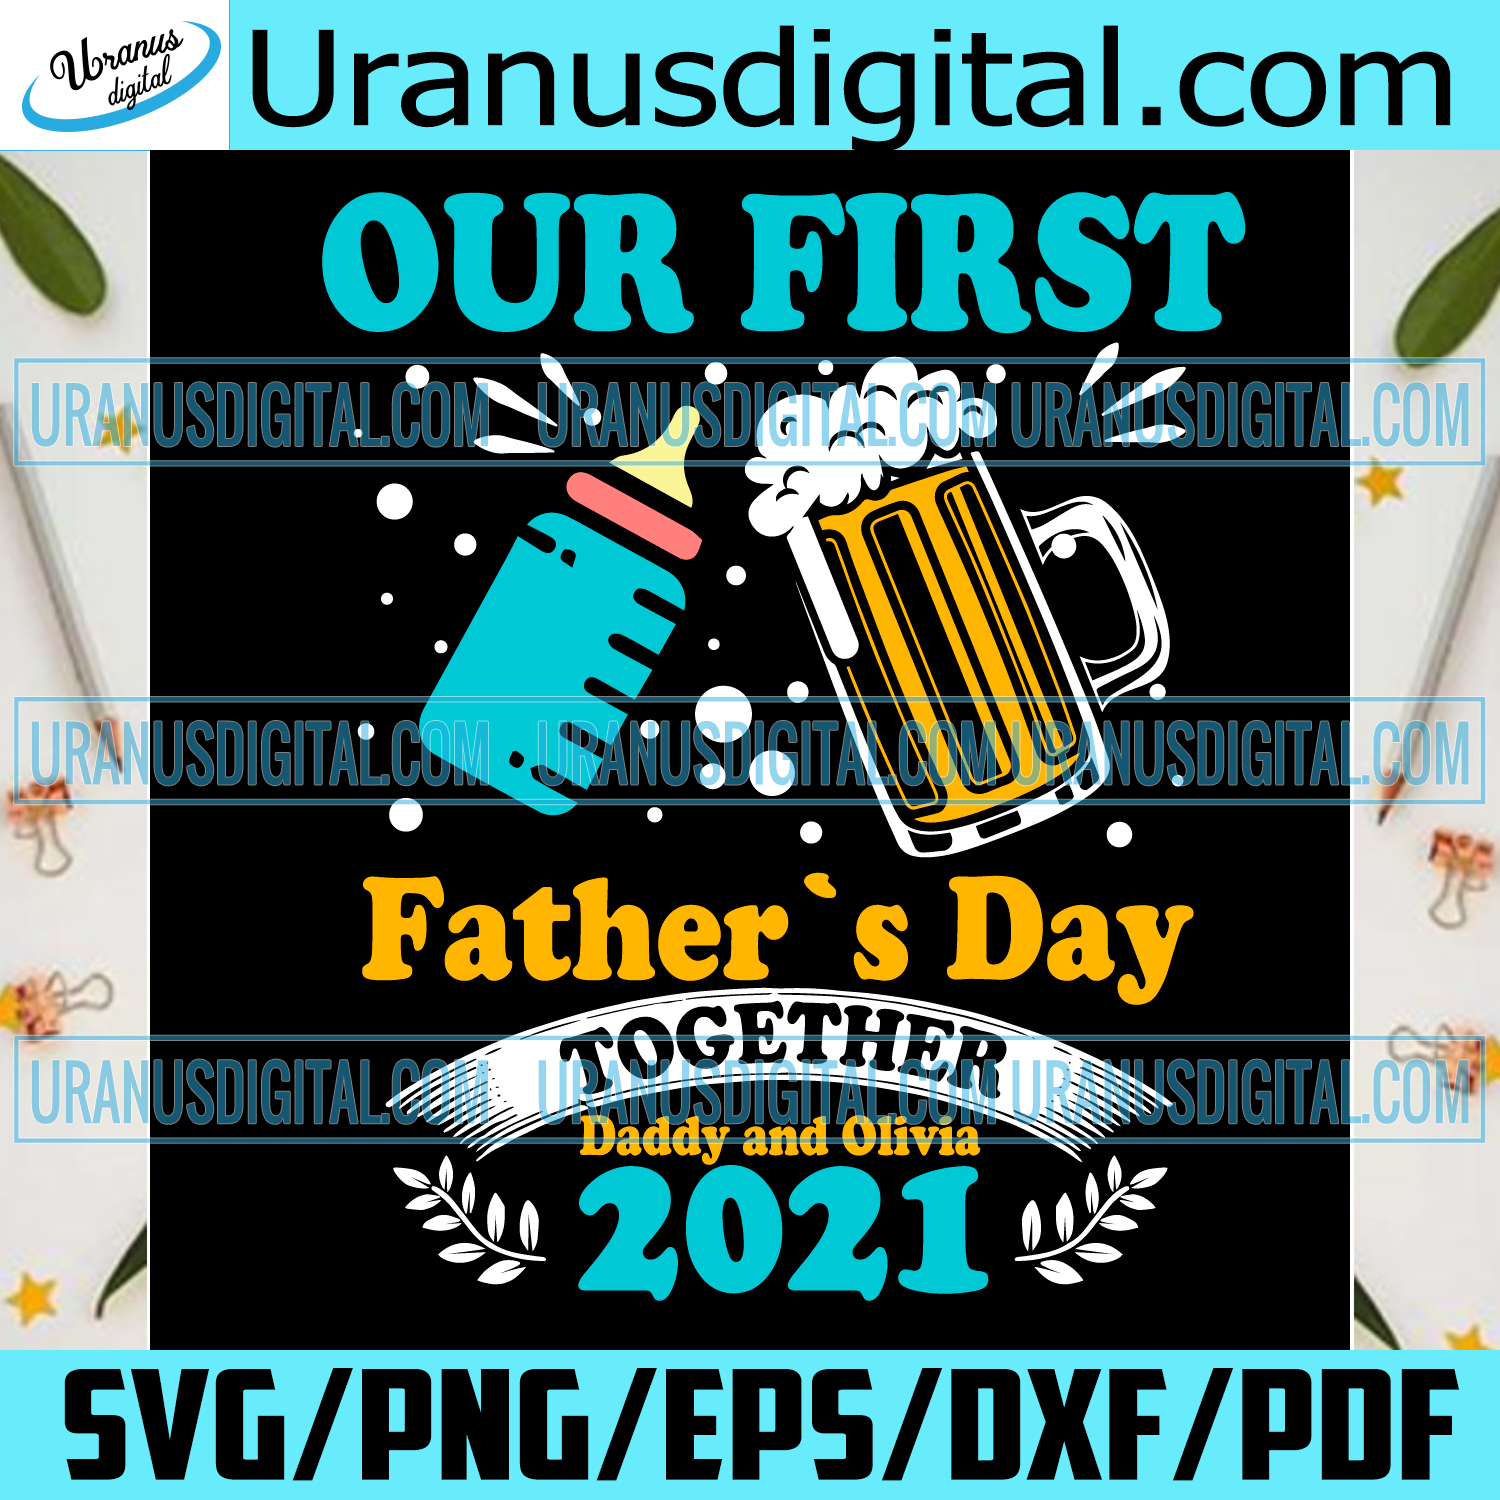 Download Ourfirst Fathers Day Together Daddy And Olivia 2021 Svg Fathers Day S Uranusdigital